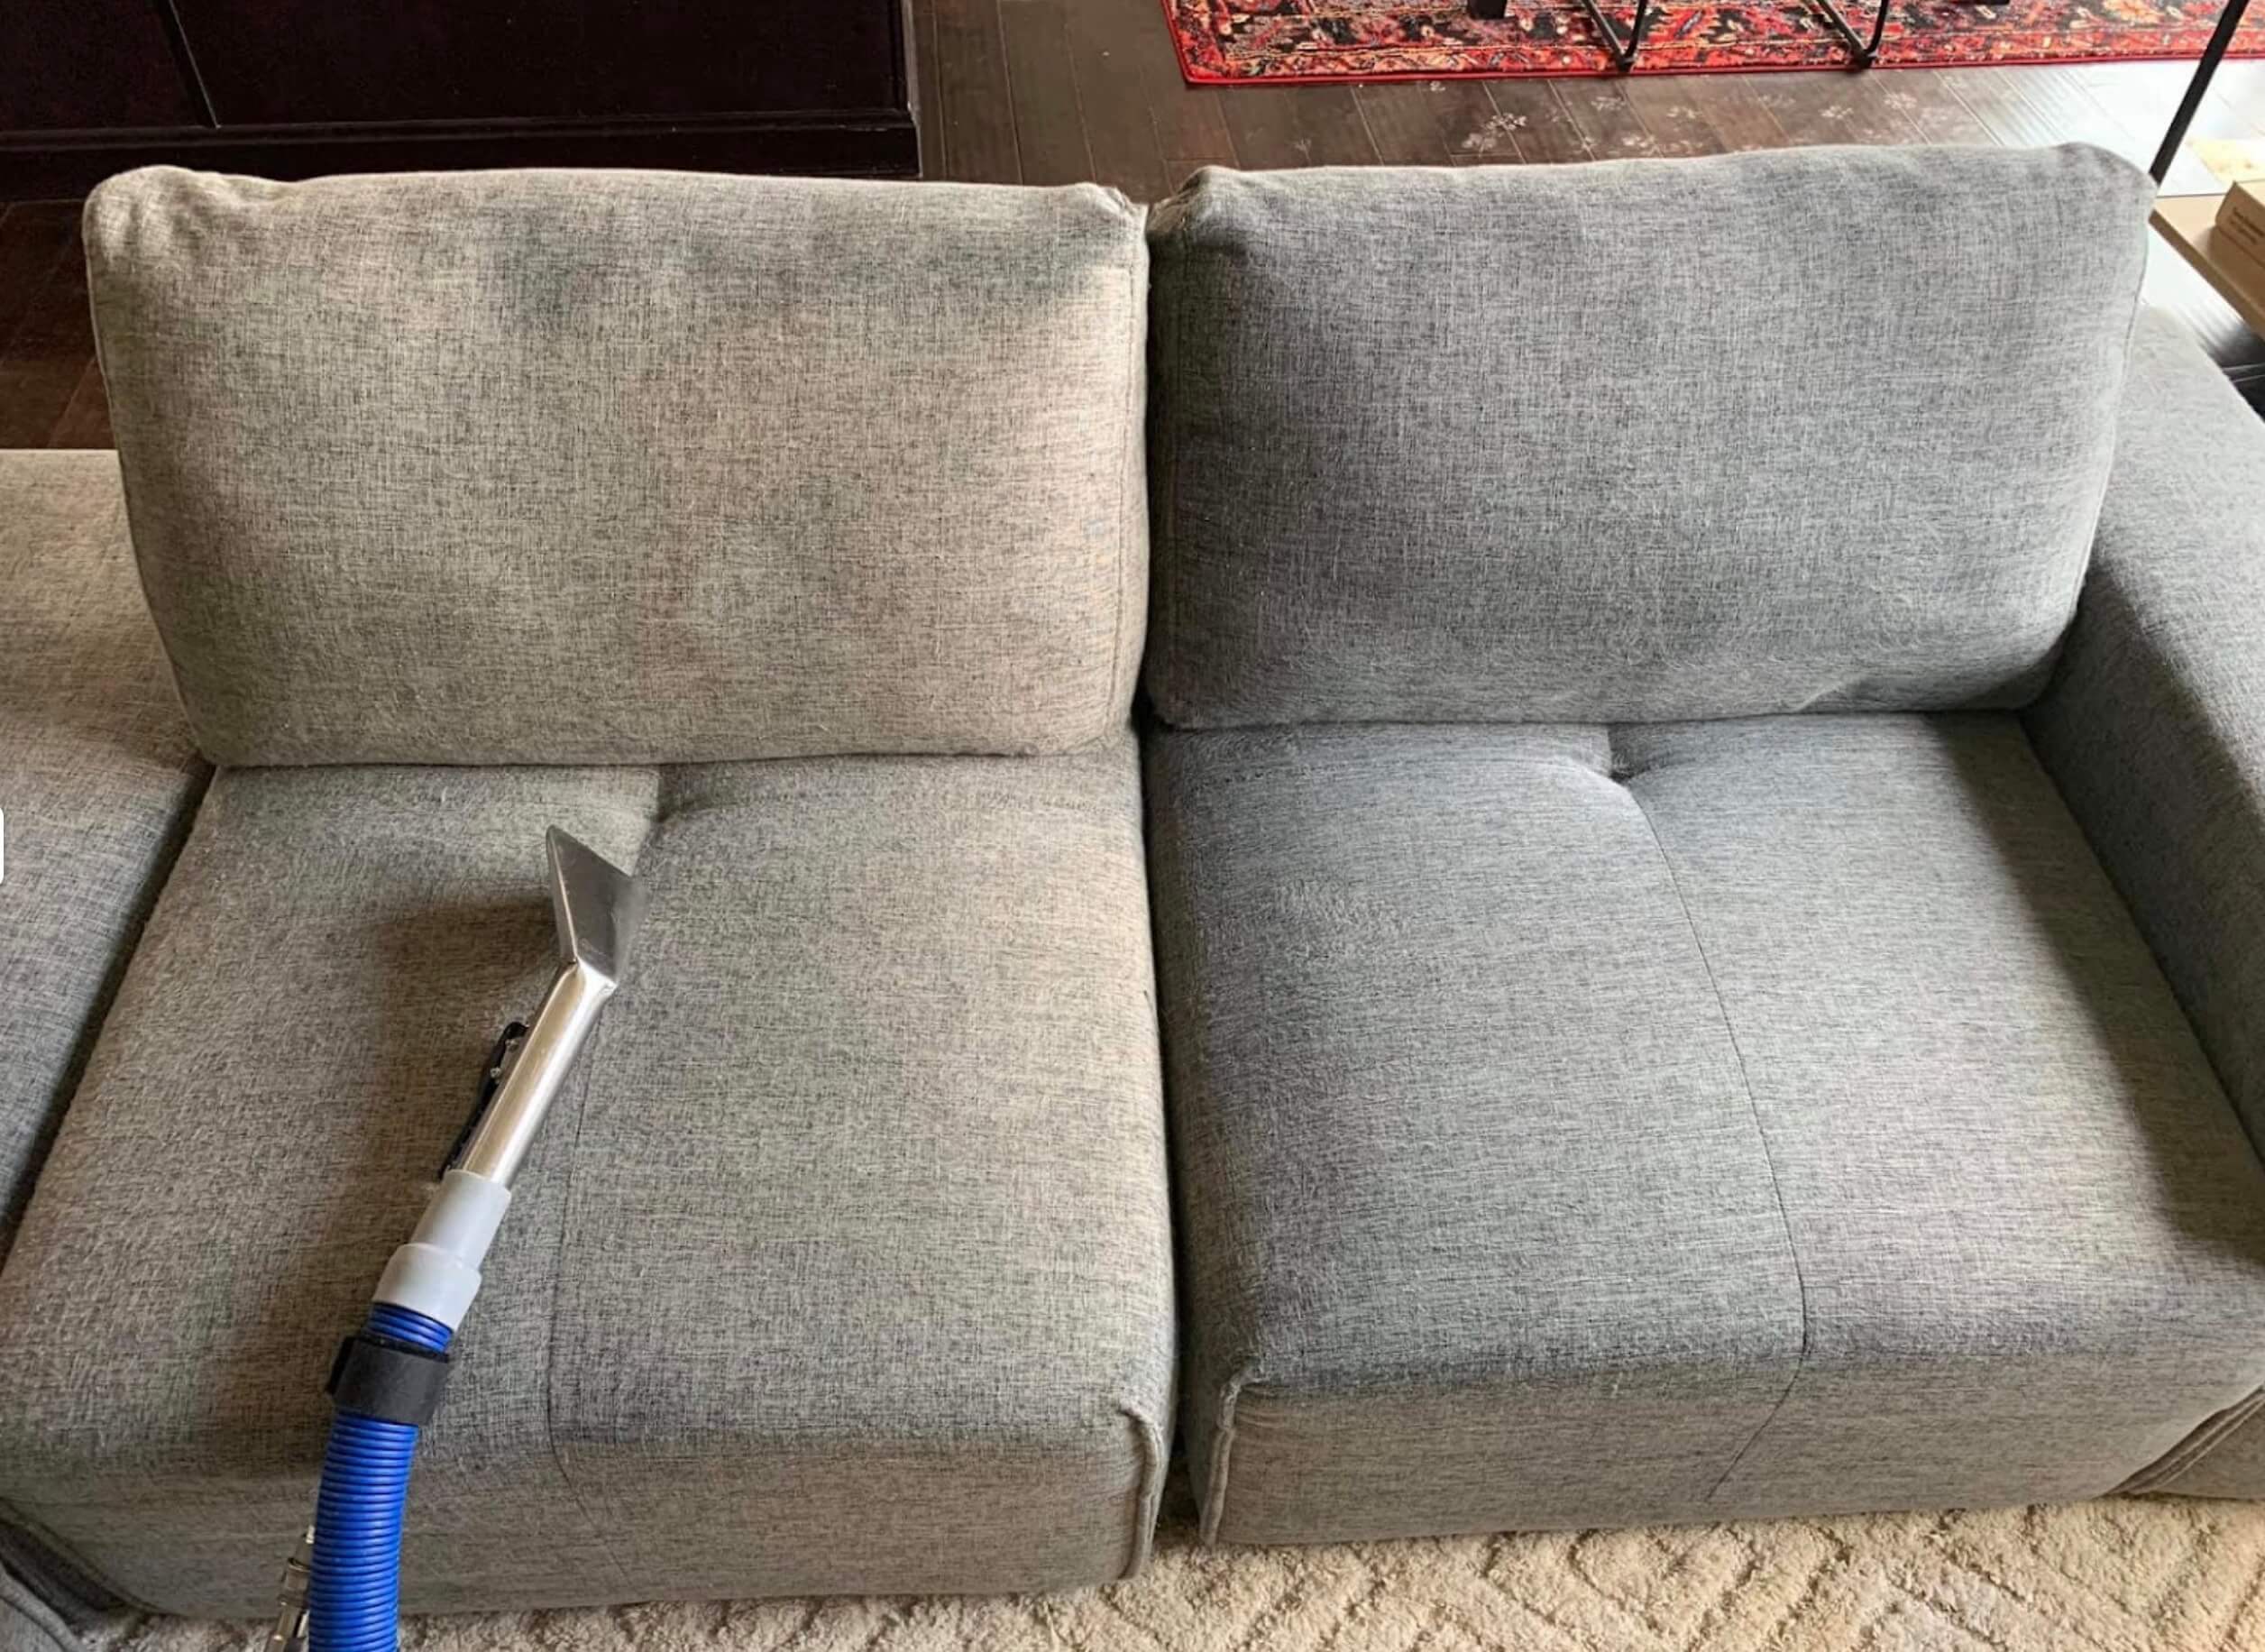 DIY Hacks To Remove Red Wine Stains From Upholstery